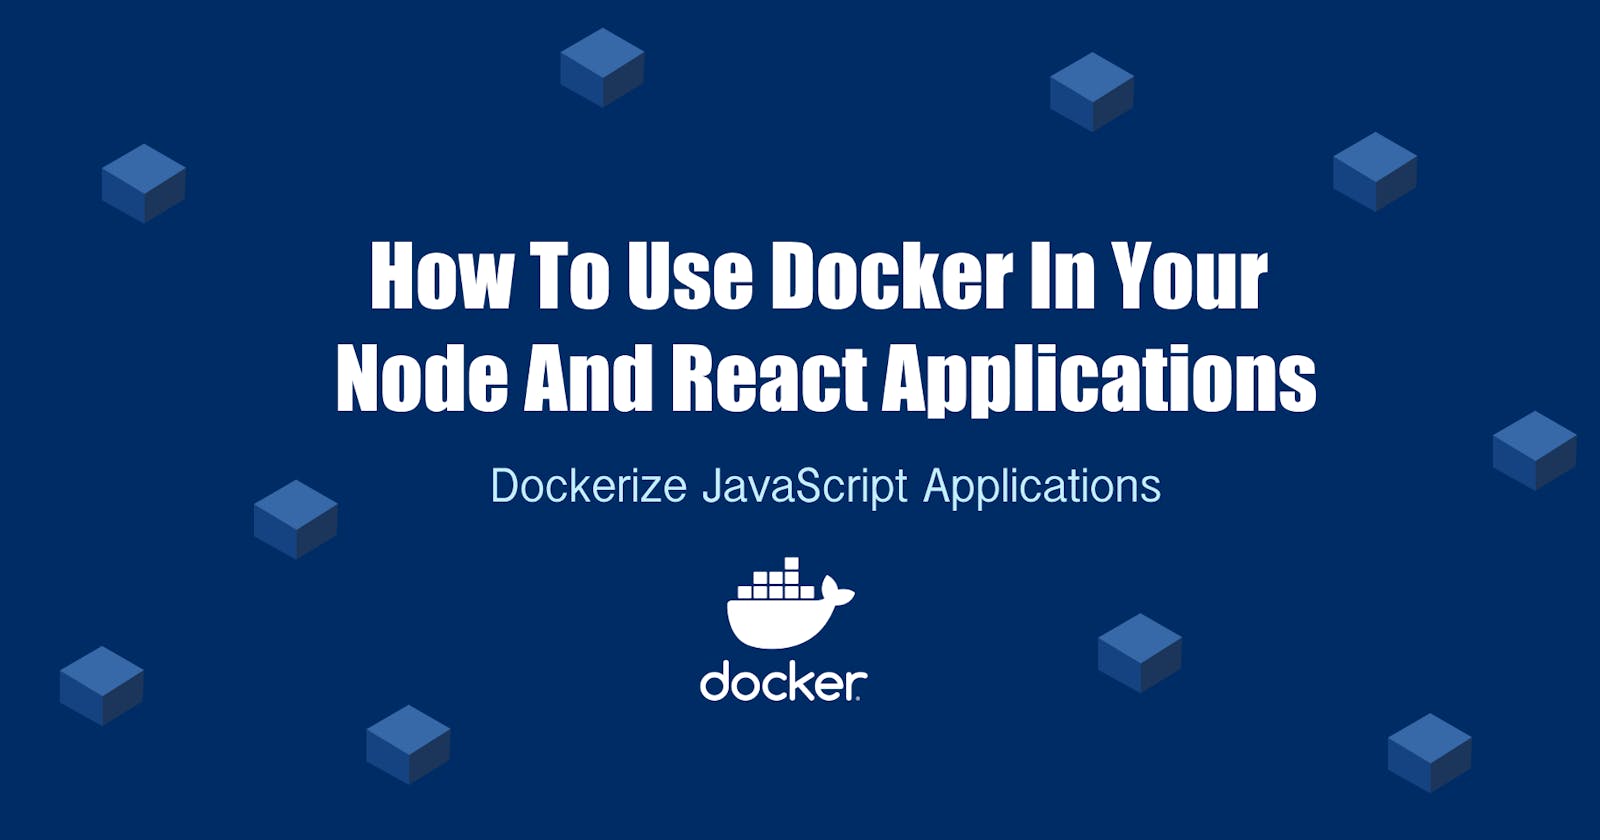 How to use Docker in your Node and React Applications